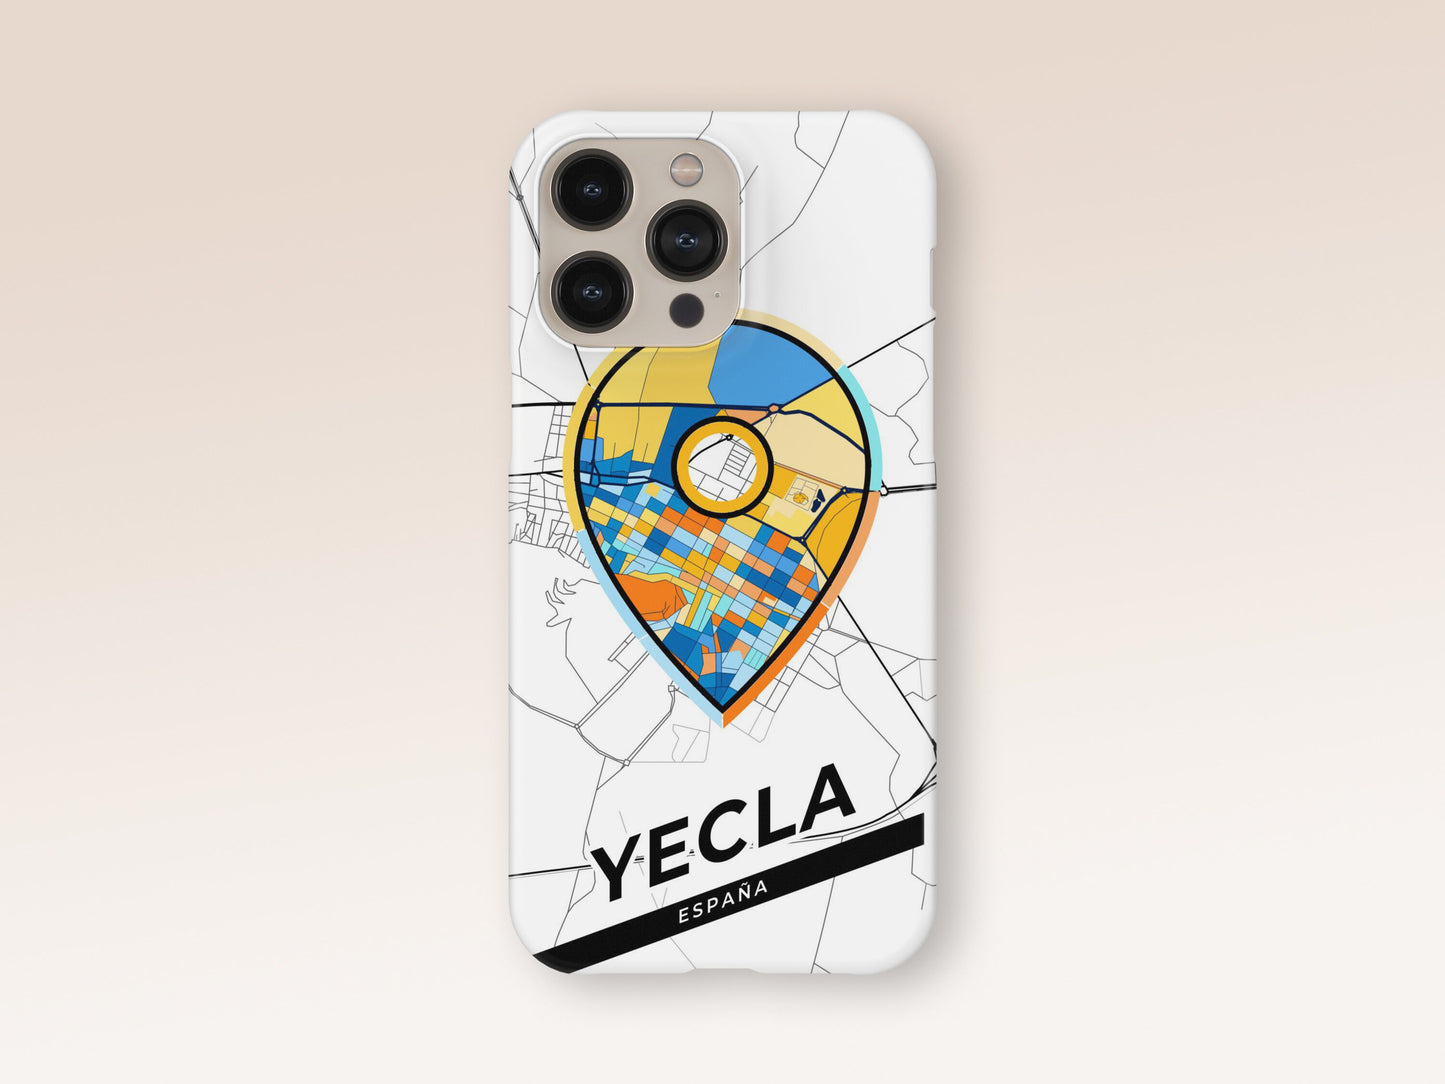 Yecla Spain slim phone case with colorful icon 1